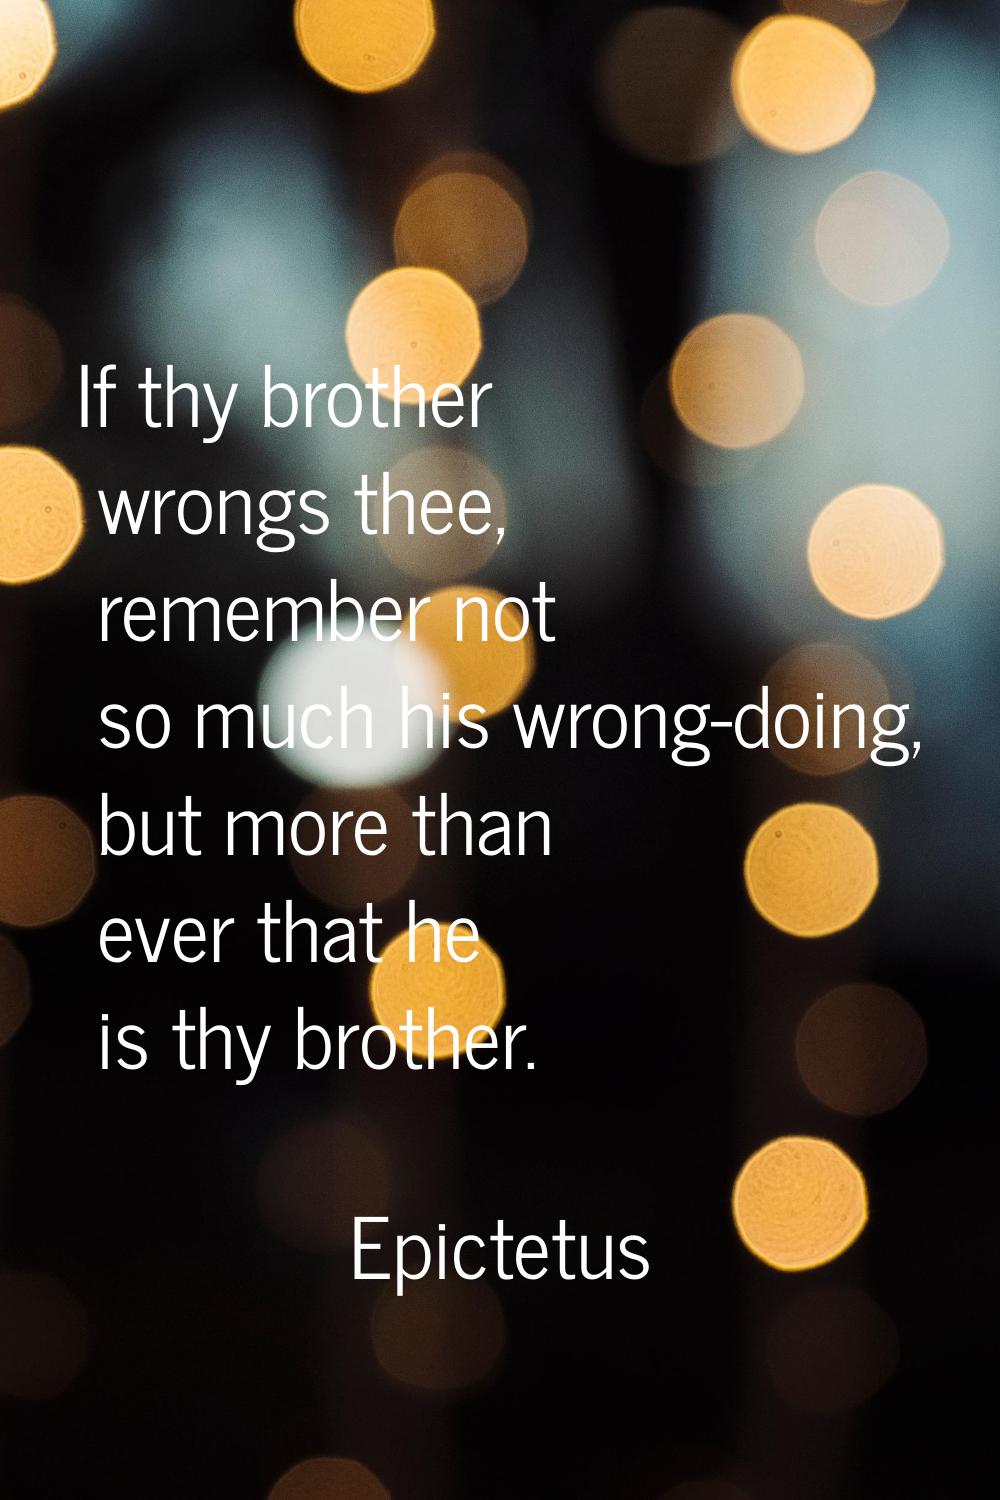 If thy brother wrongs thee, remember not so much his wrong-doing, but more than ever that he is thy